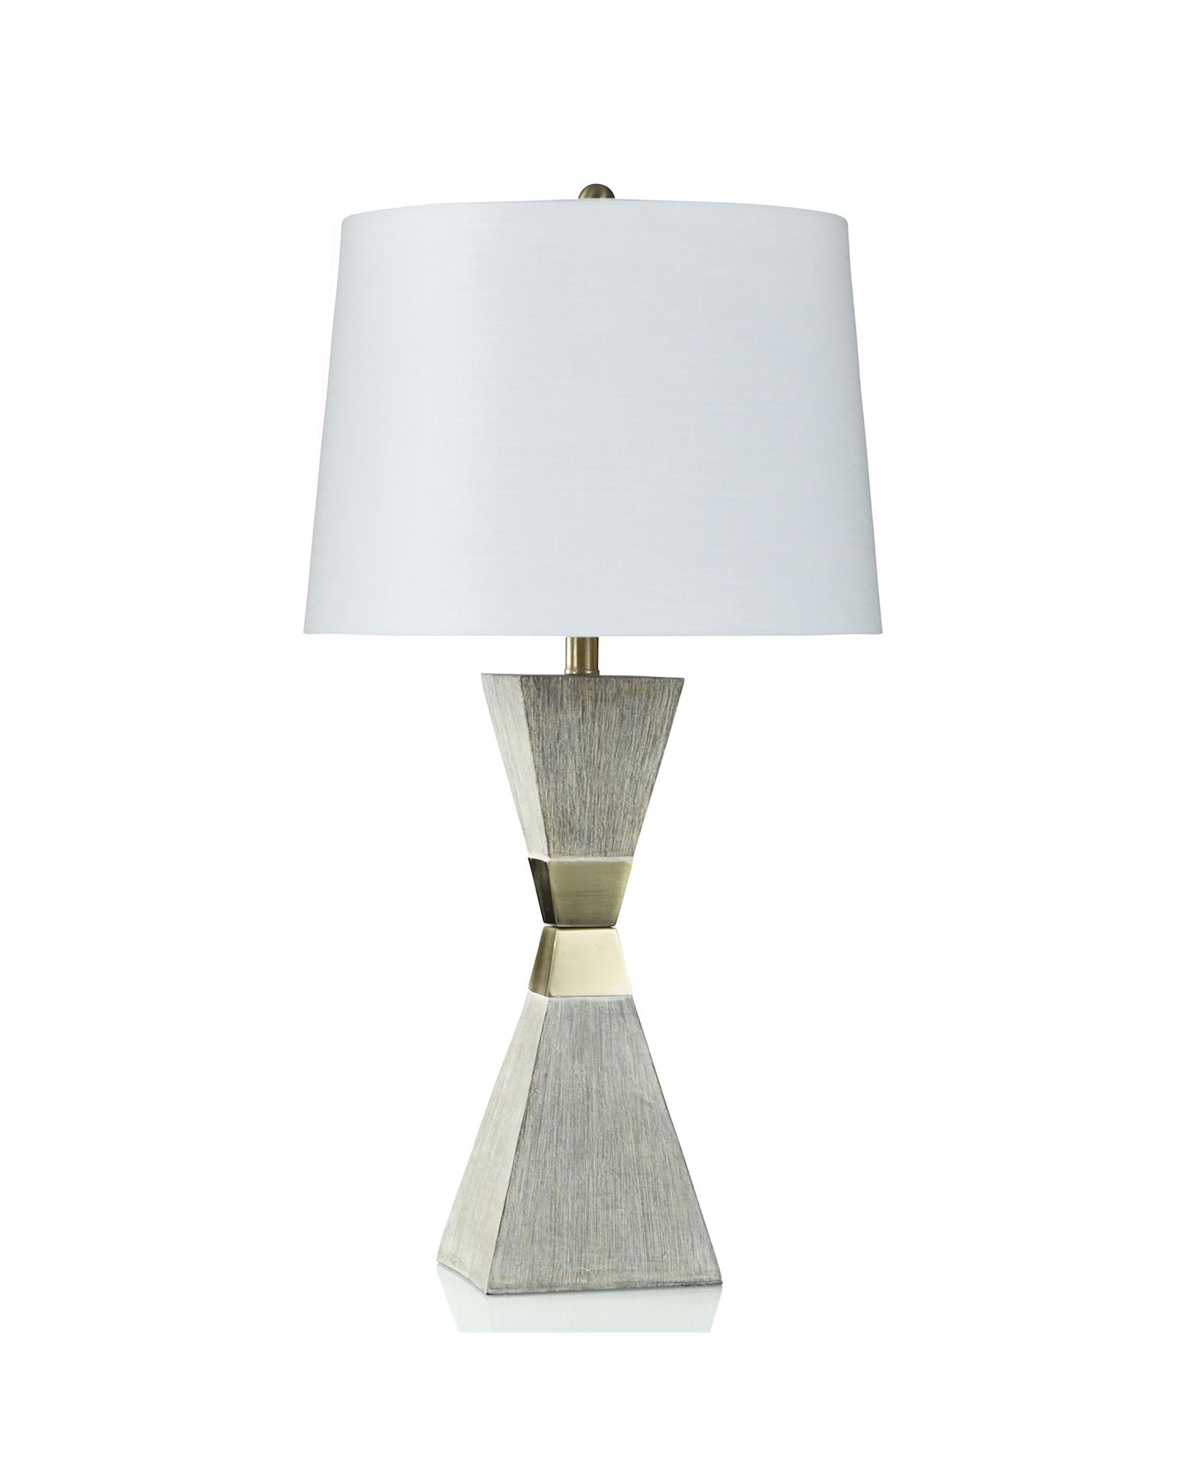 Stylecraft Home Collection 32.25" Morris Geometric Base Table Lamp With Bronze Accents In Antique Brass,washed Gray